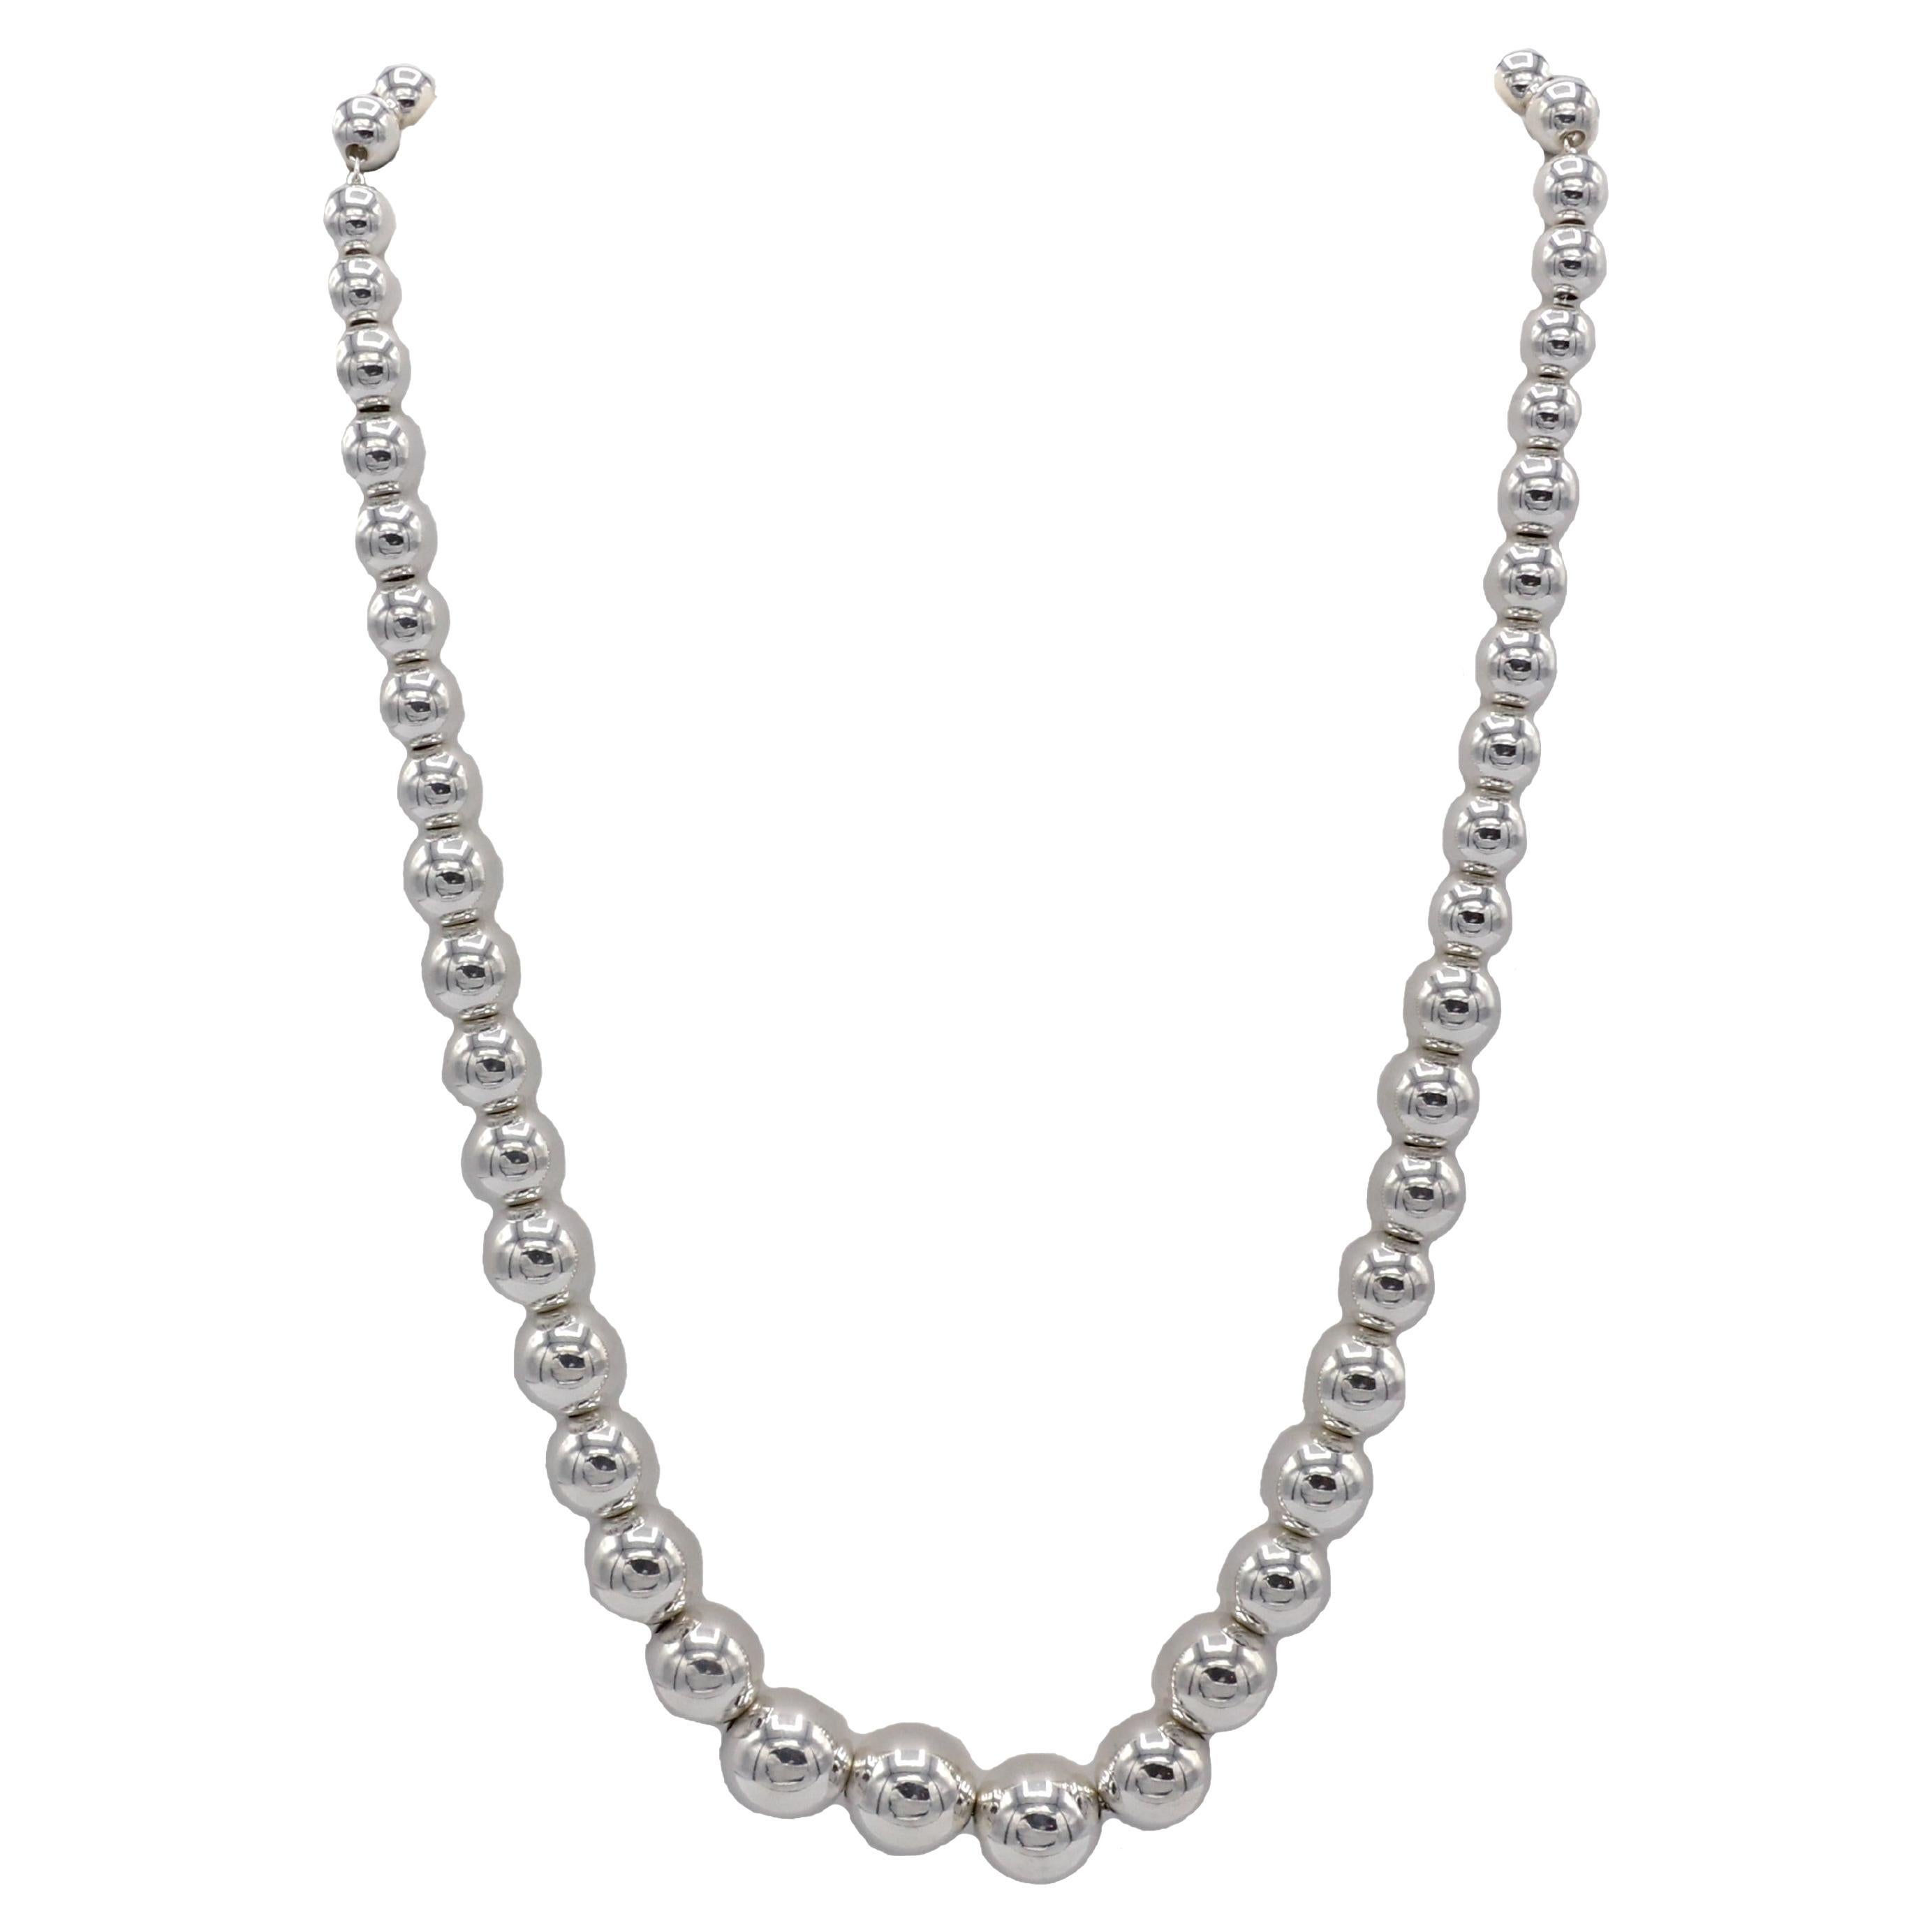 Tiffany & Co. Hardware Graduated Sterling Silver Ball Bead Necklace